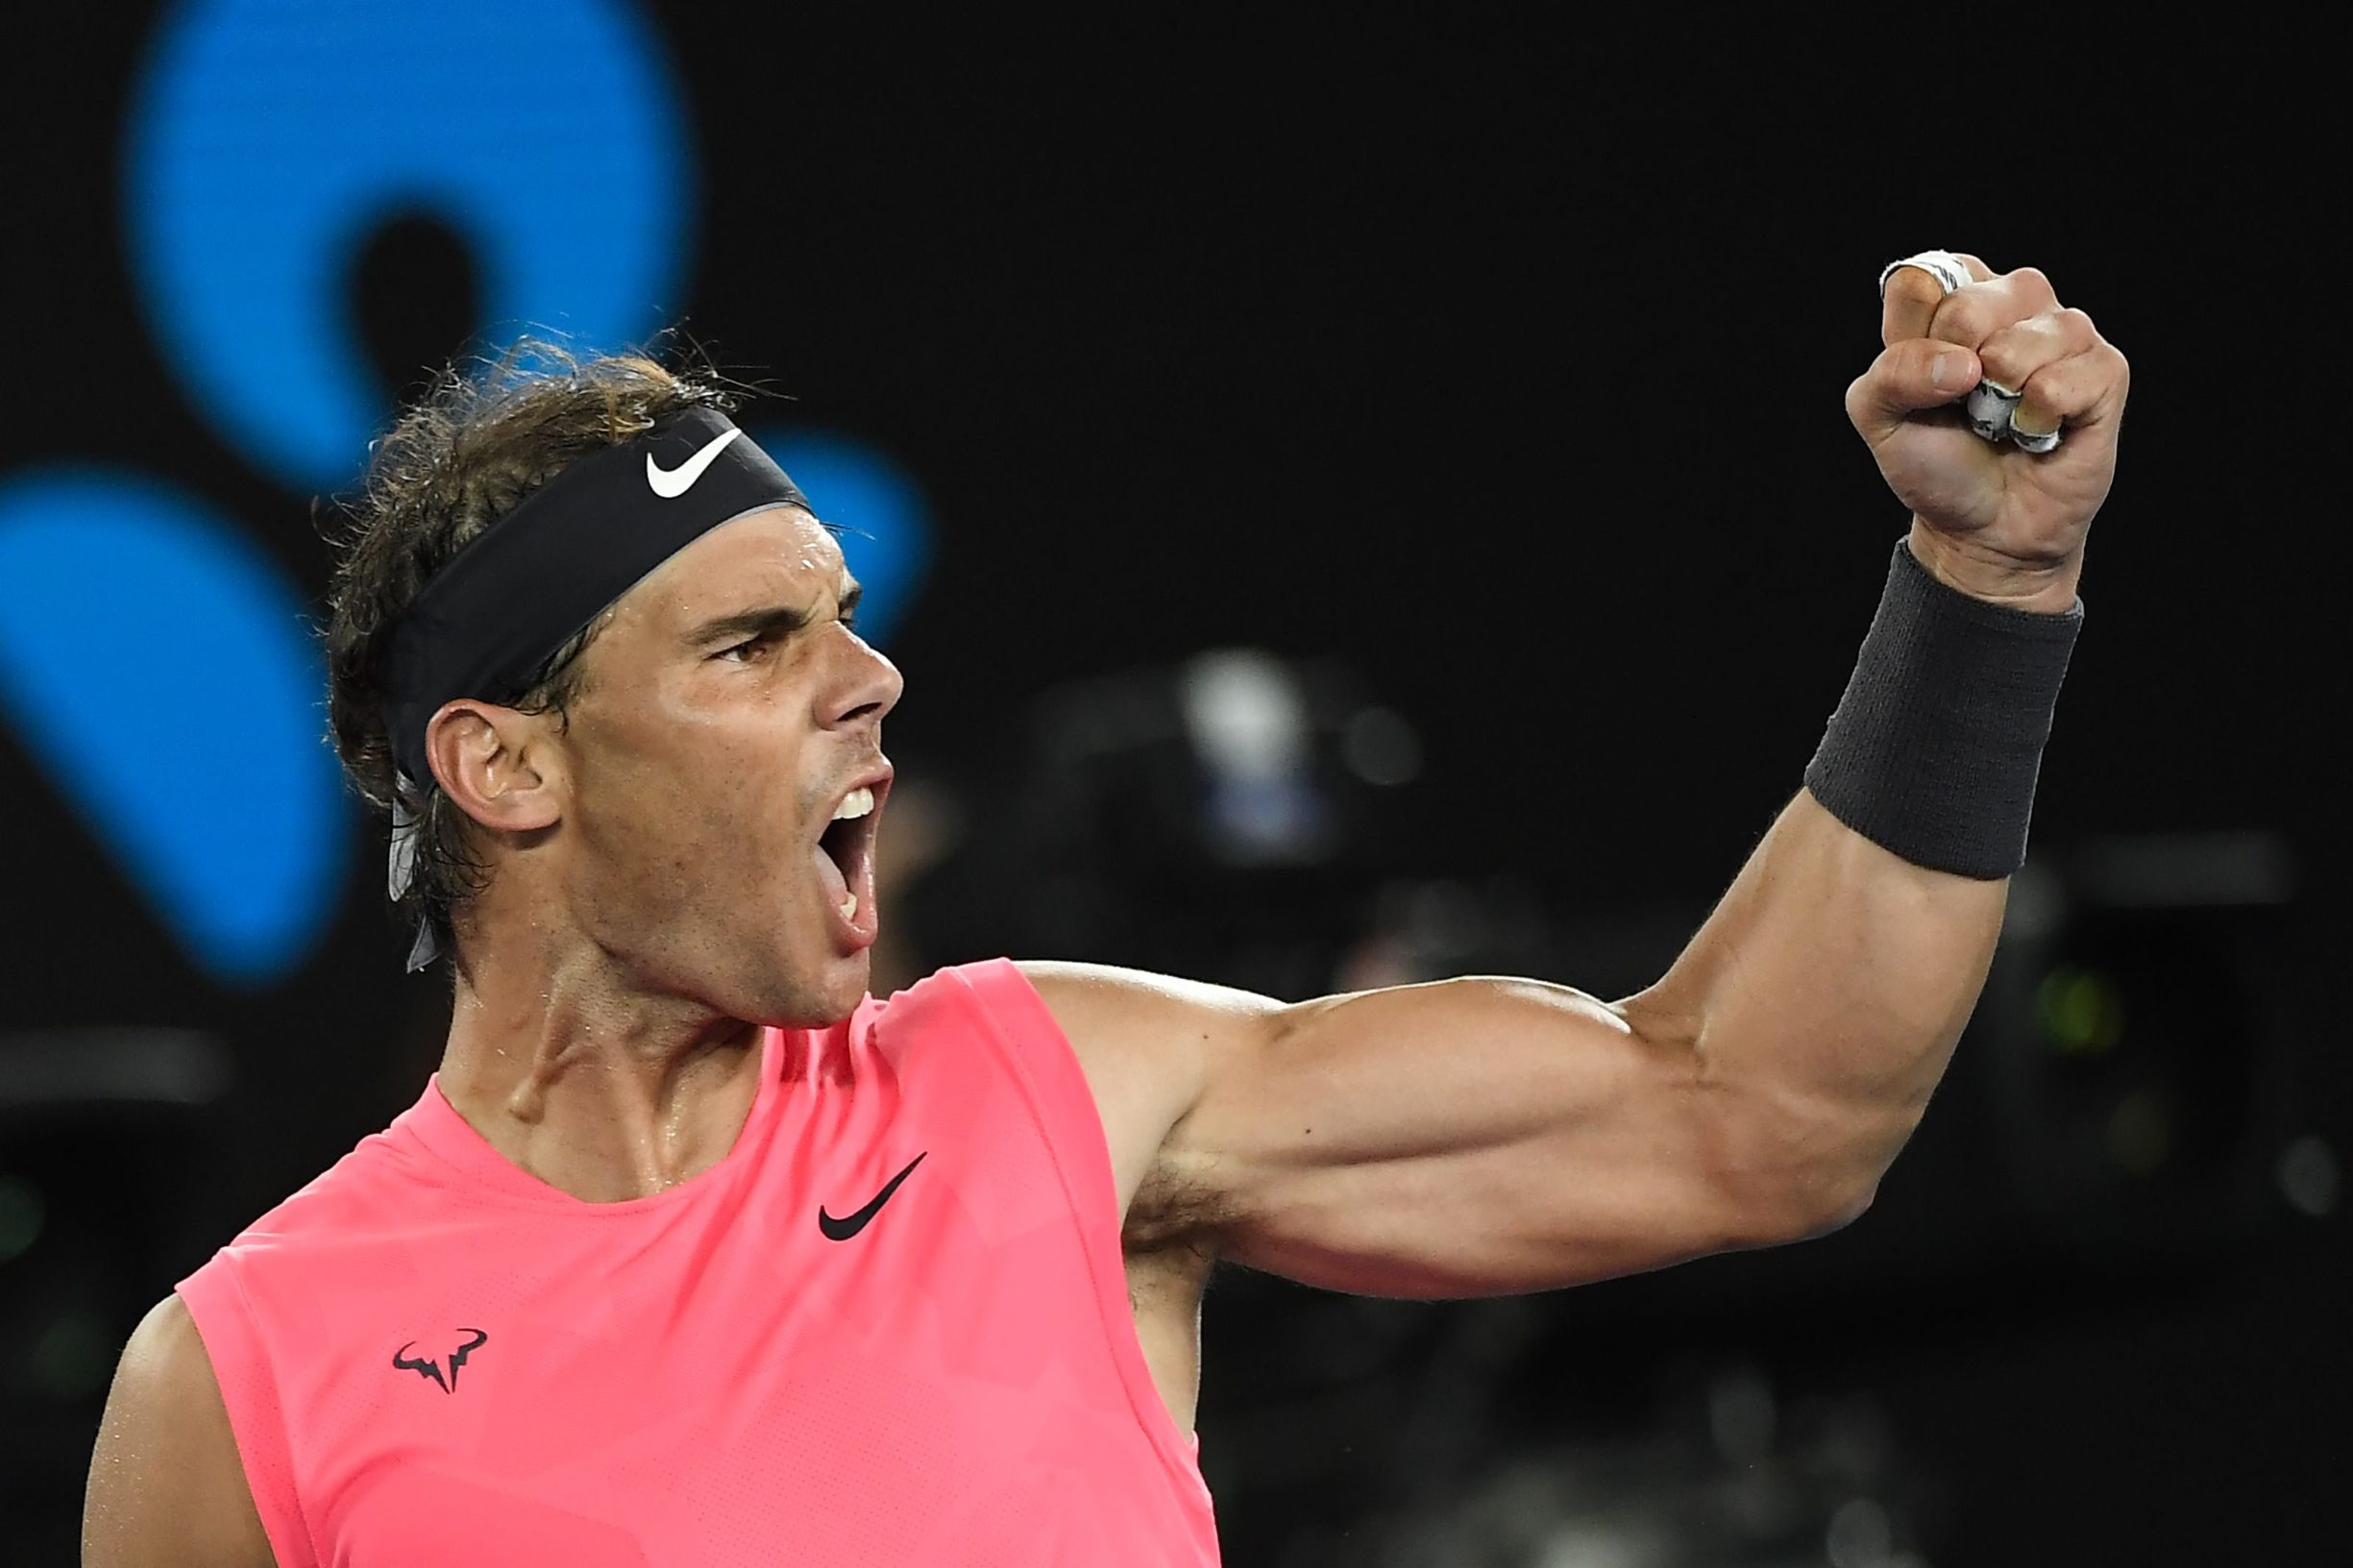 TOPSHOT - Spain's Rafael Nadal celebrates his victory against Australia's Nick Kyrgios during their men's singles match on day eight of the Australian Open tennis tournament in Melbourne on January 27, 2020. (Photo by Saeed KHAN / AFP) / IMAGE RESTRICTED TO EDITORIAL USE - STRICTLY NO COMMERCIAL USE